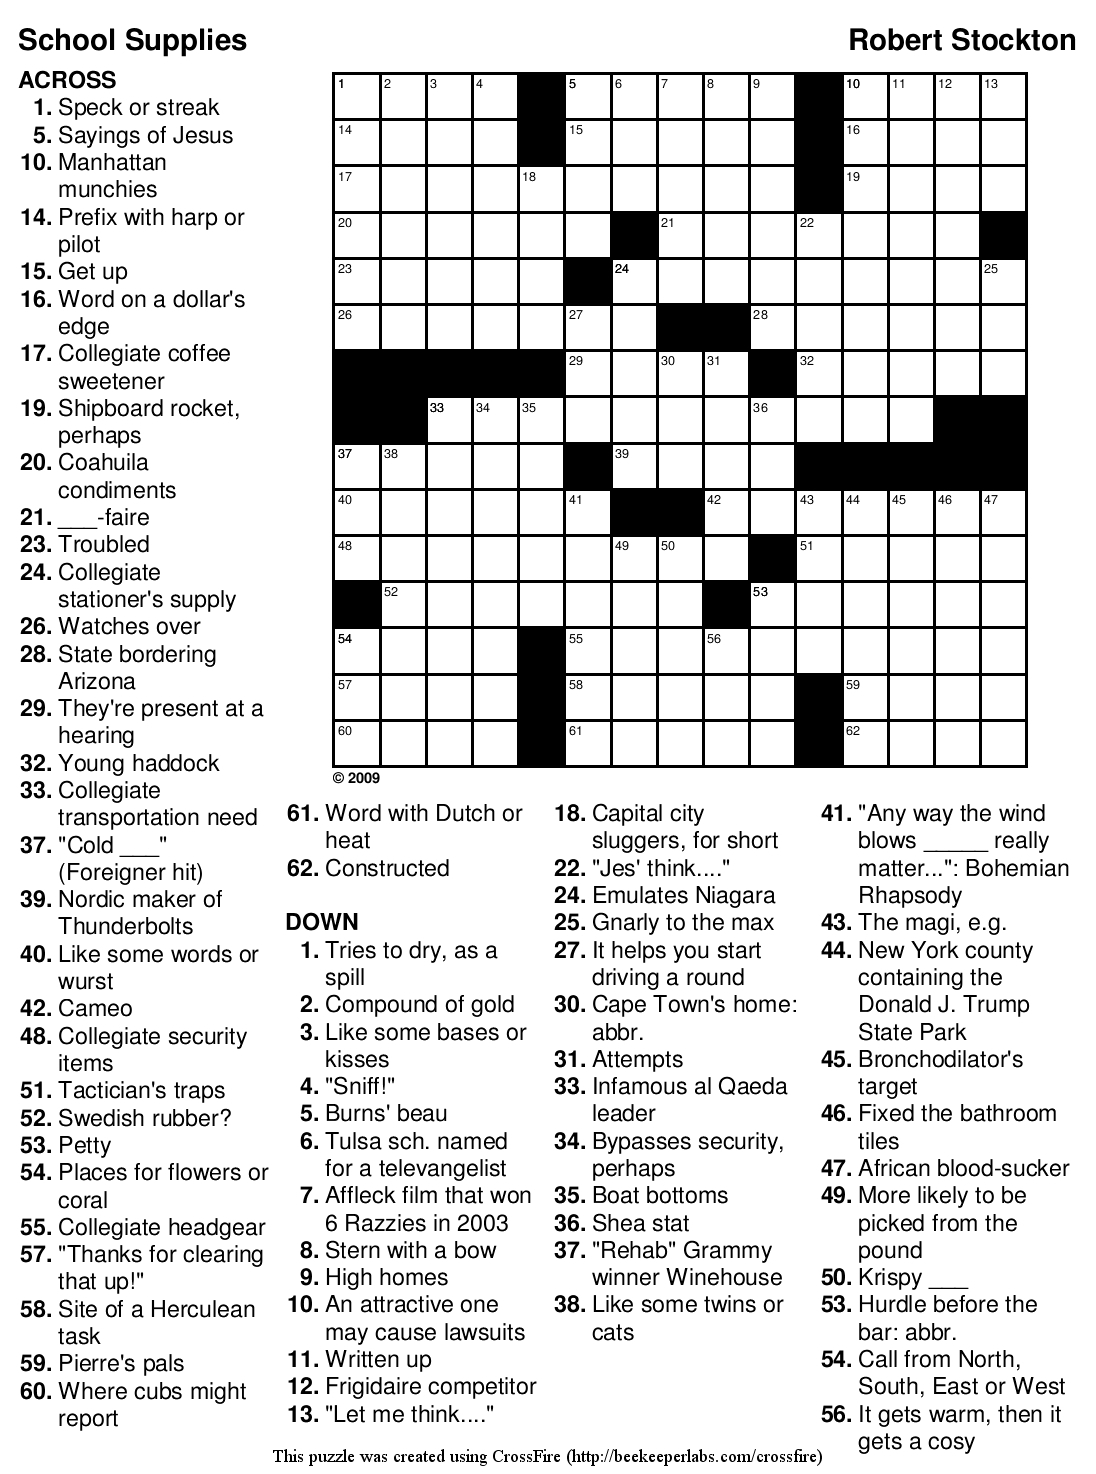 Free Daily Online Printable Crossword Puzzles | Free Printables - Printable Crossword Puzzles Job